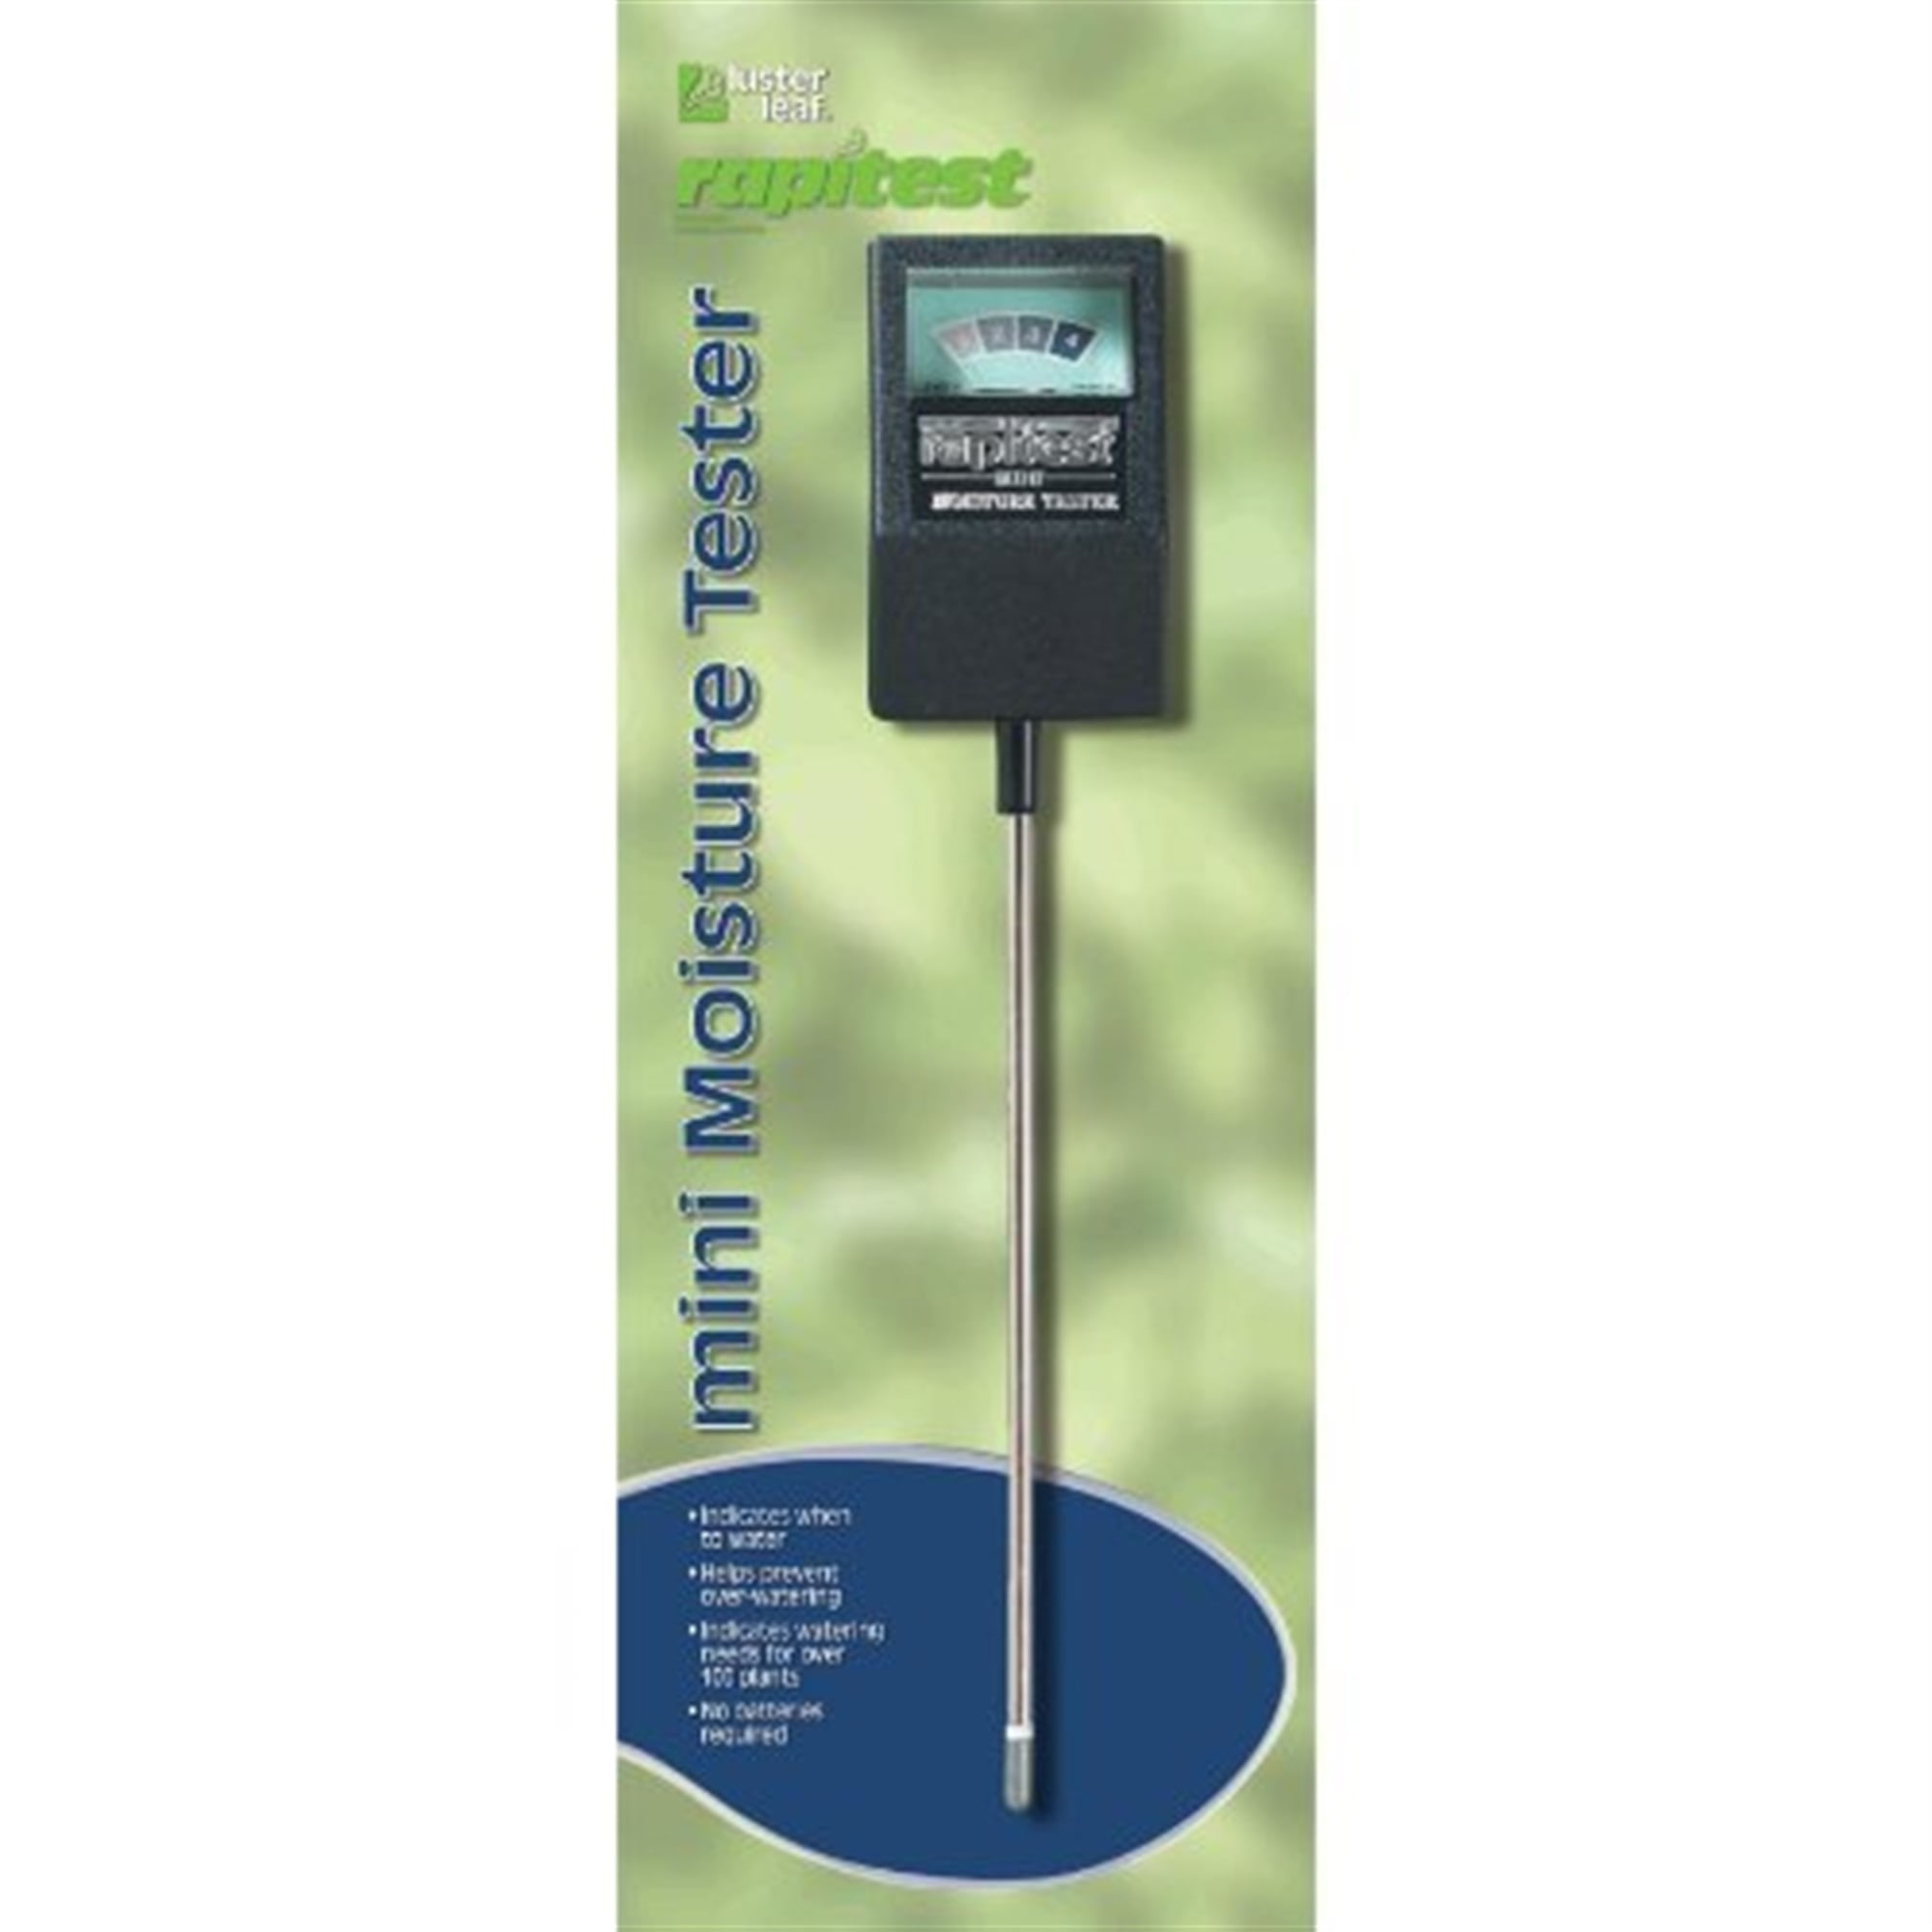 Details about   PH-98108 Mini Food Acidity Meter PH Tester For Plants Flowers Measuring Moisture 